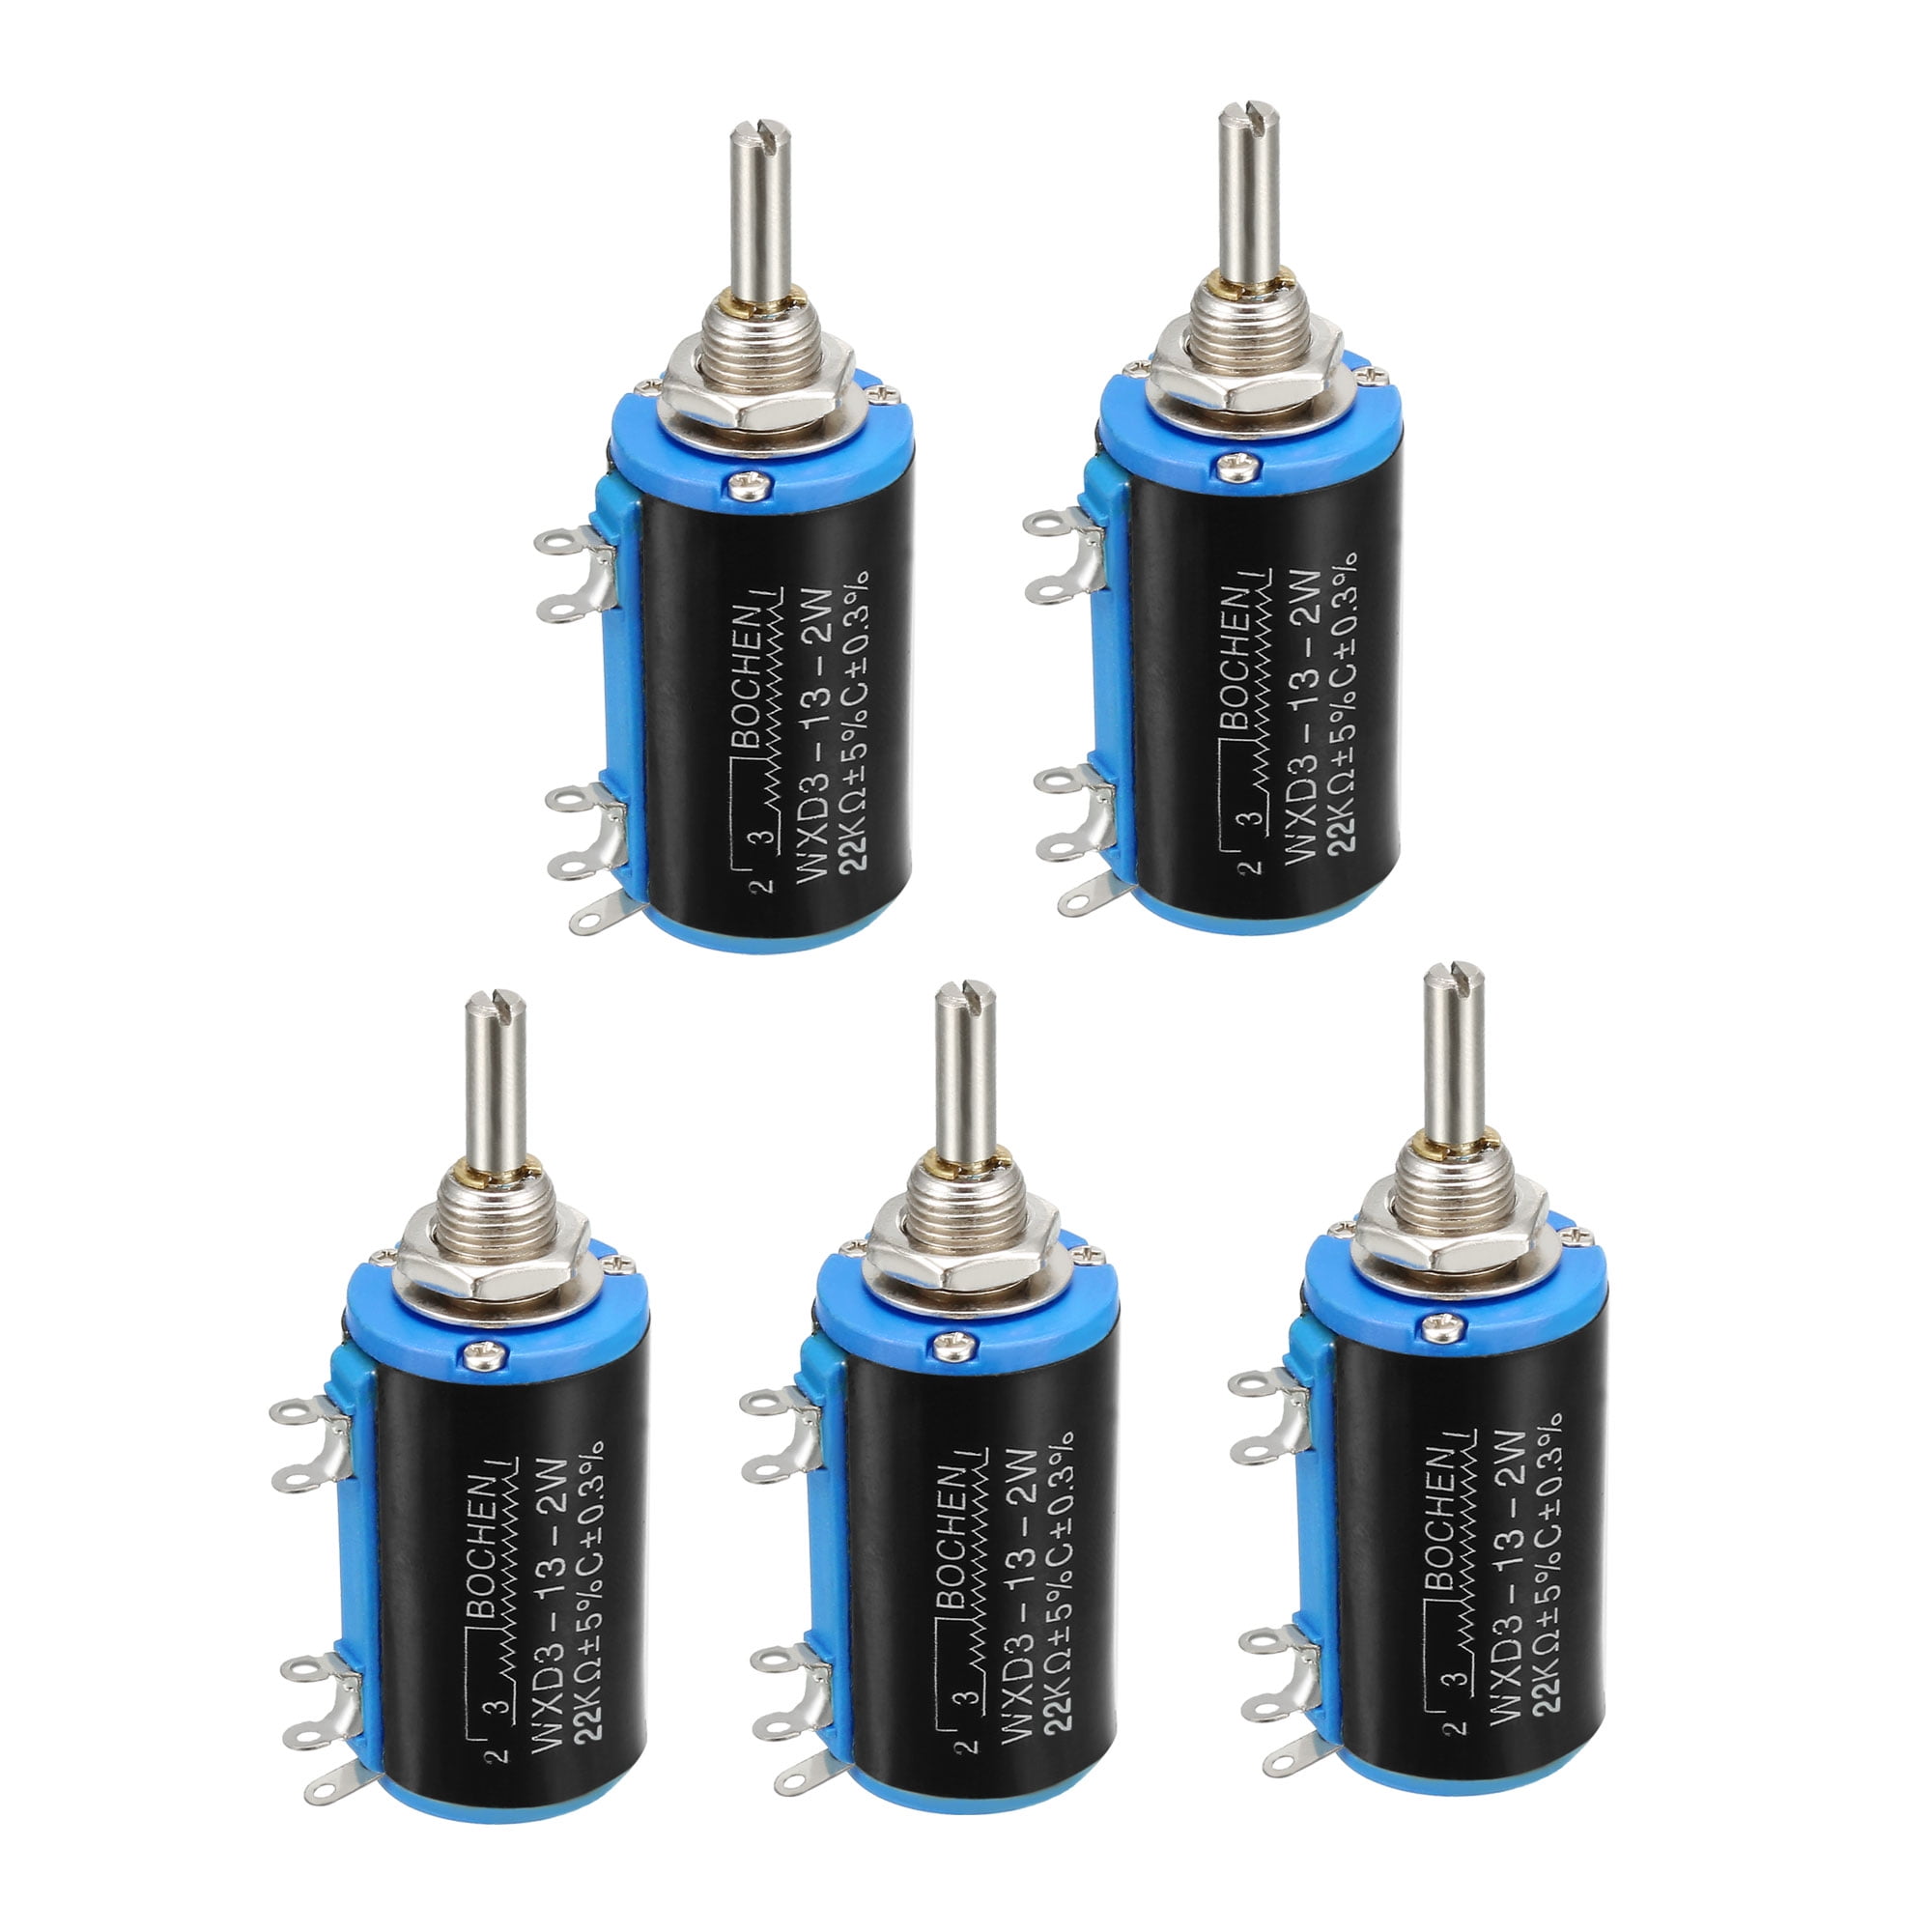 uxcell 100K Ohm Potentiometer Pots Adjustable Resistors Wire Wound Multi Turn Precision with knobs 1pcs 